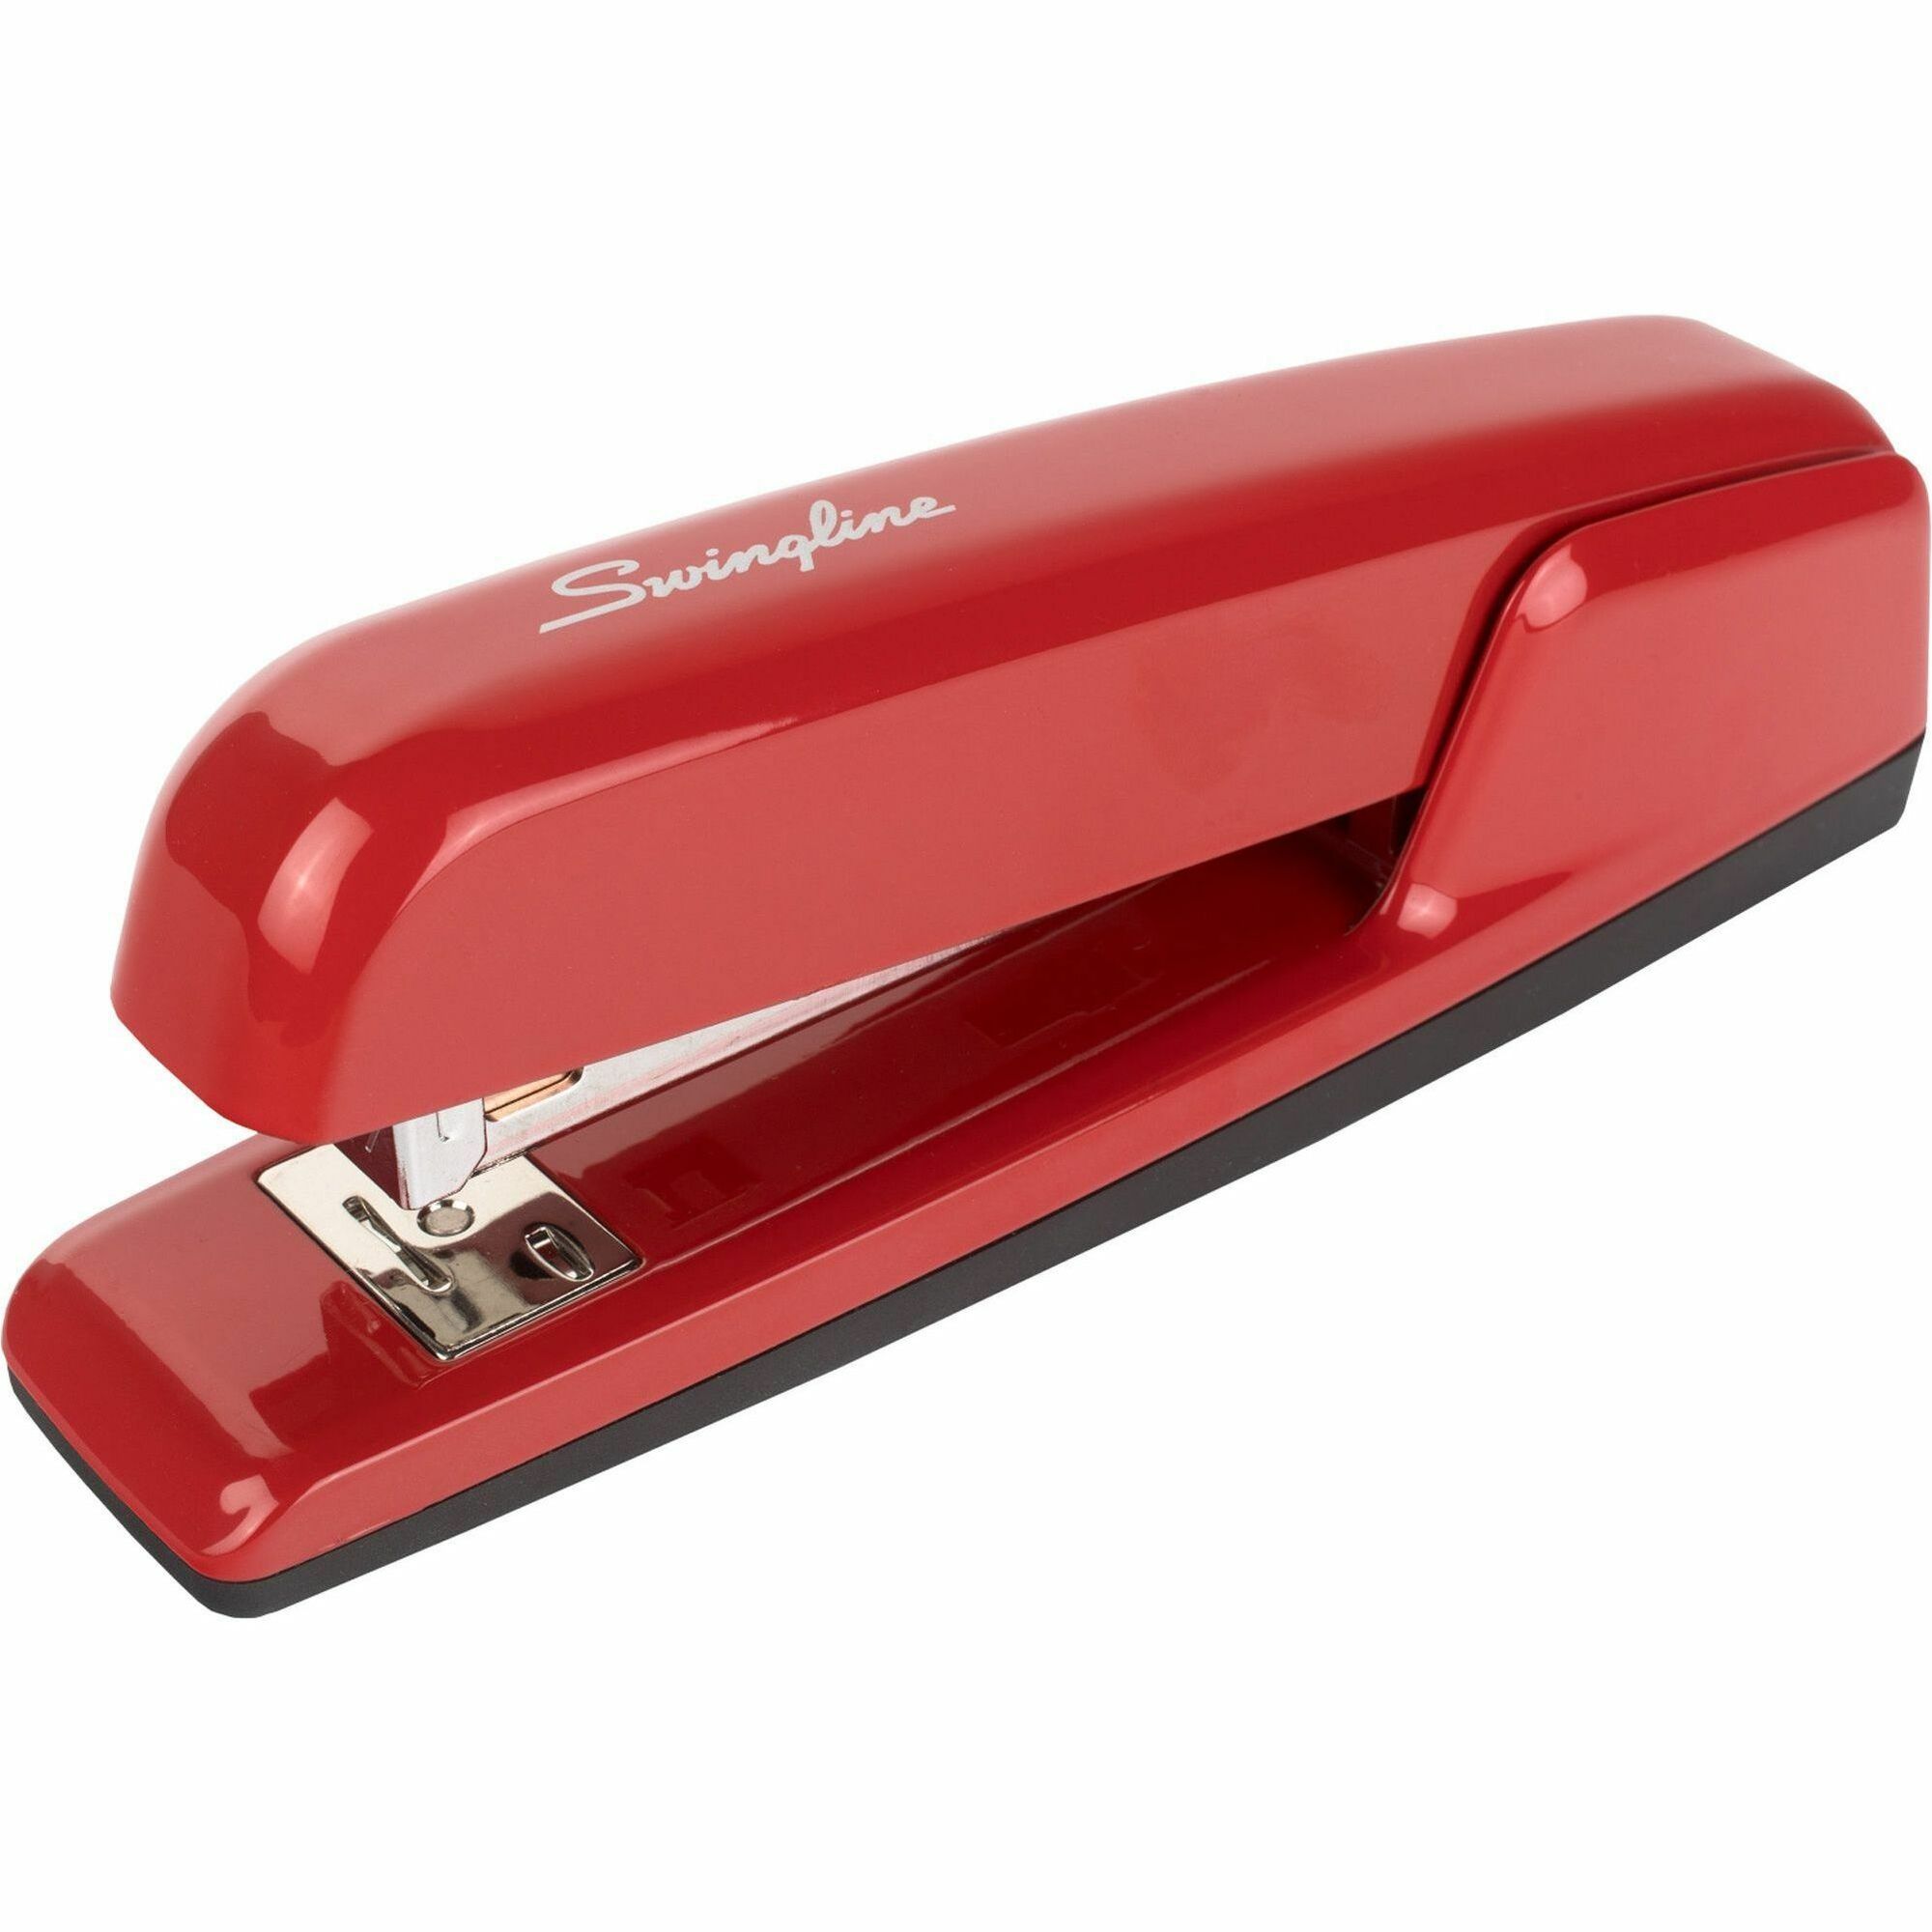 Swingline 747 Collectors Edition Stapler Madill The Office Company